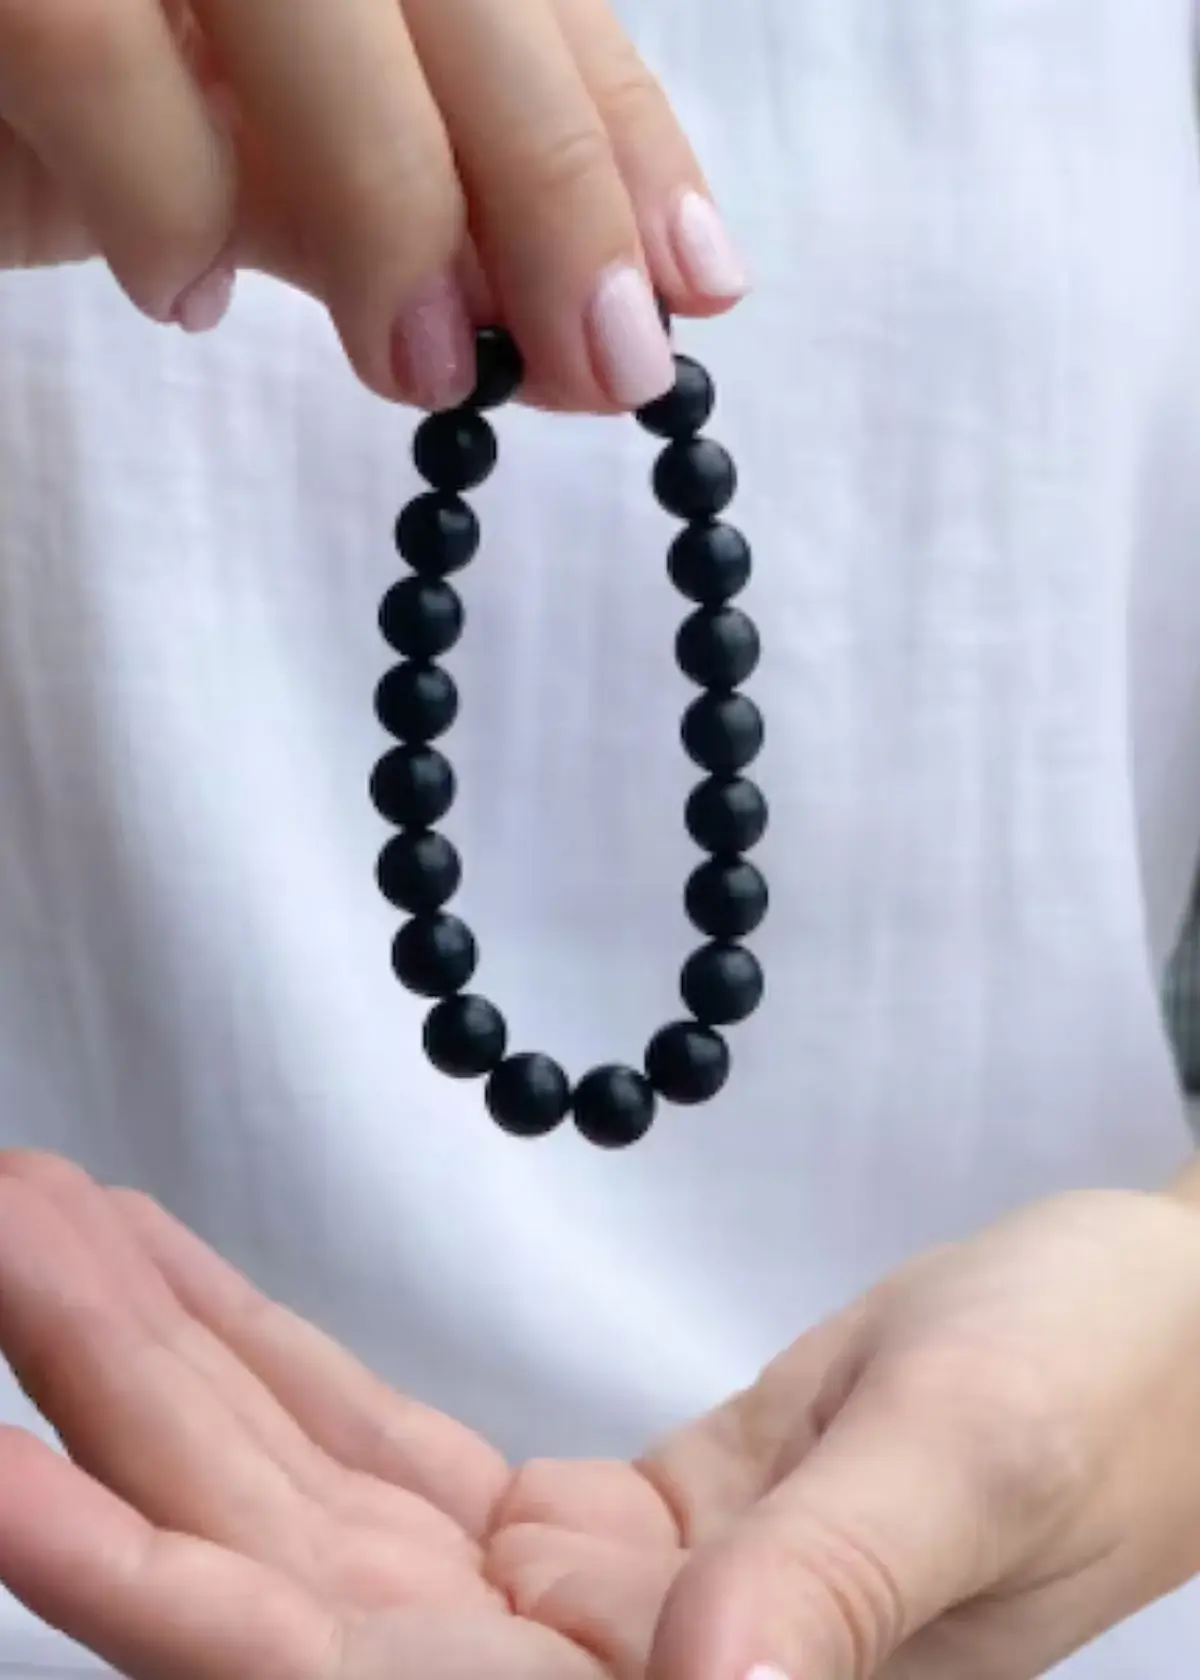 What is a Shungite bracelet?